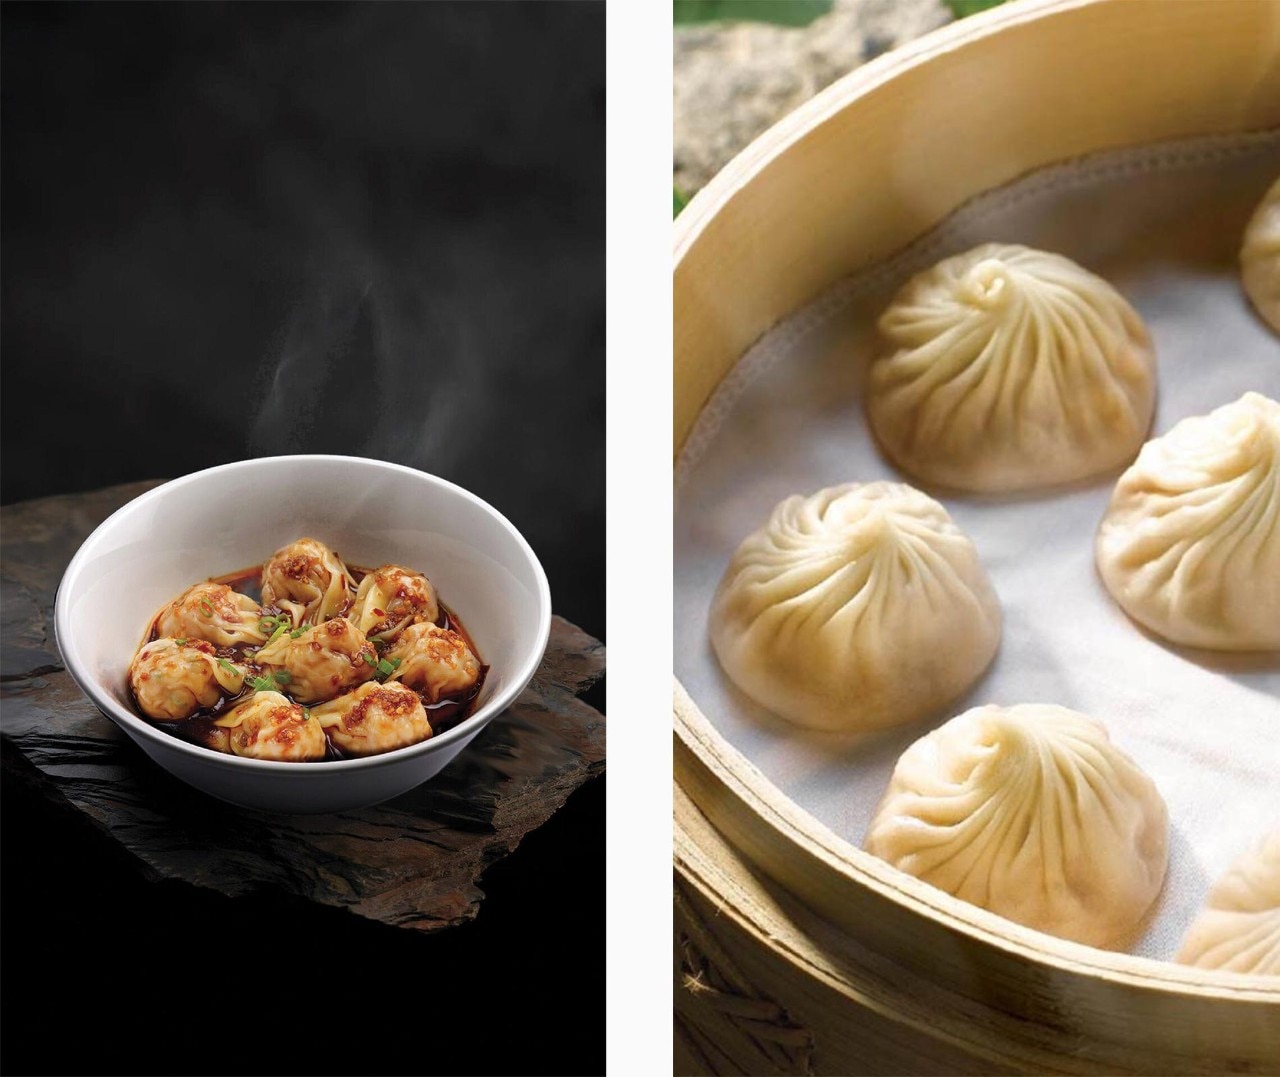 Xiao long bao and wantons in chilli oil at one of the best dim sum restaurants in Singapore